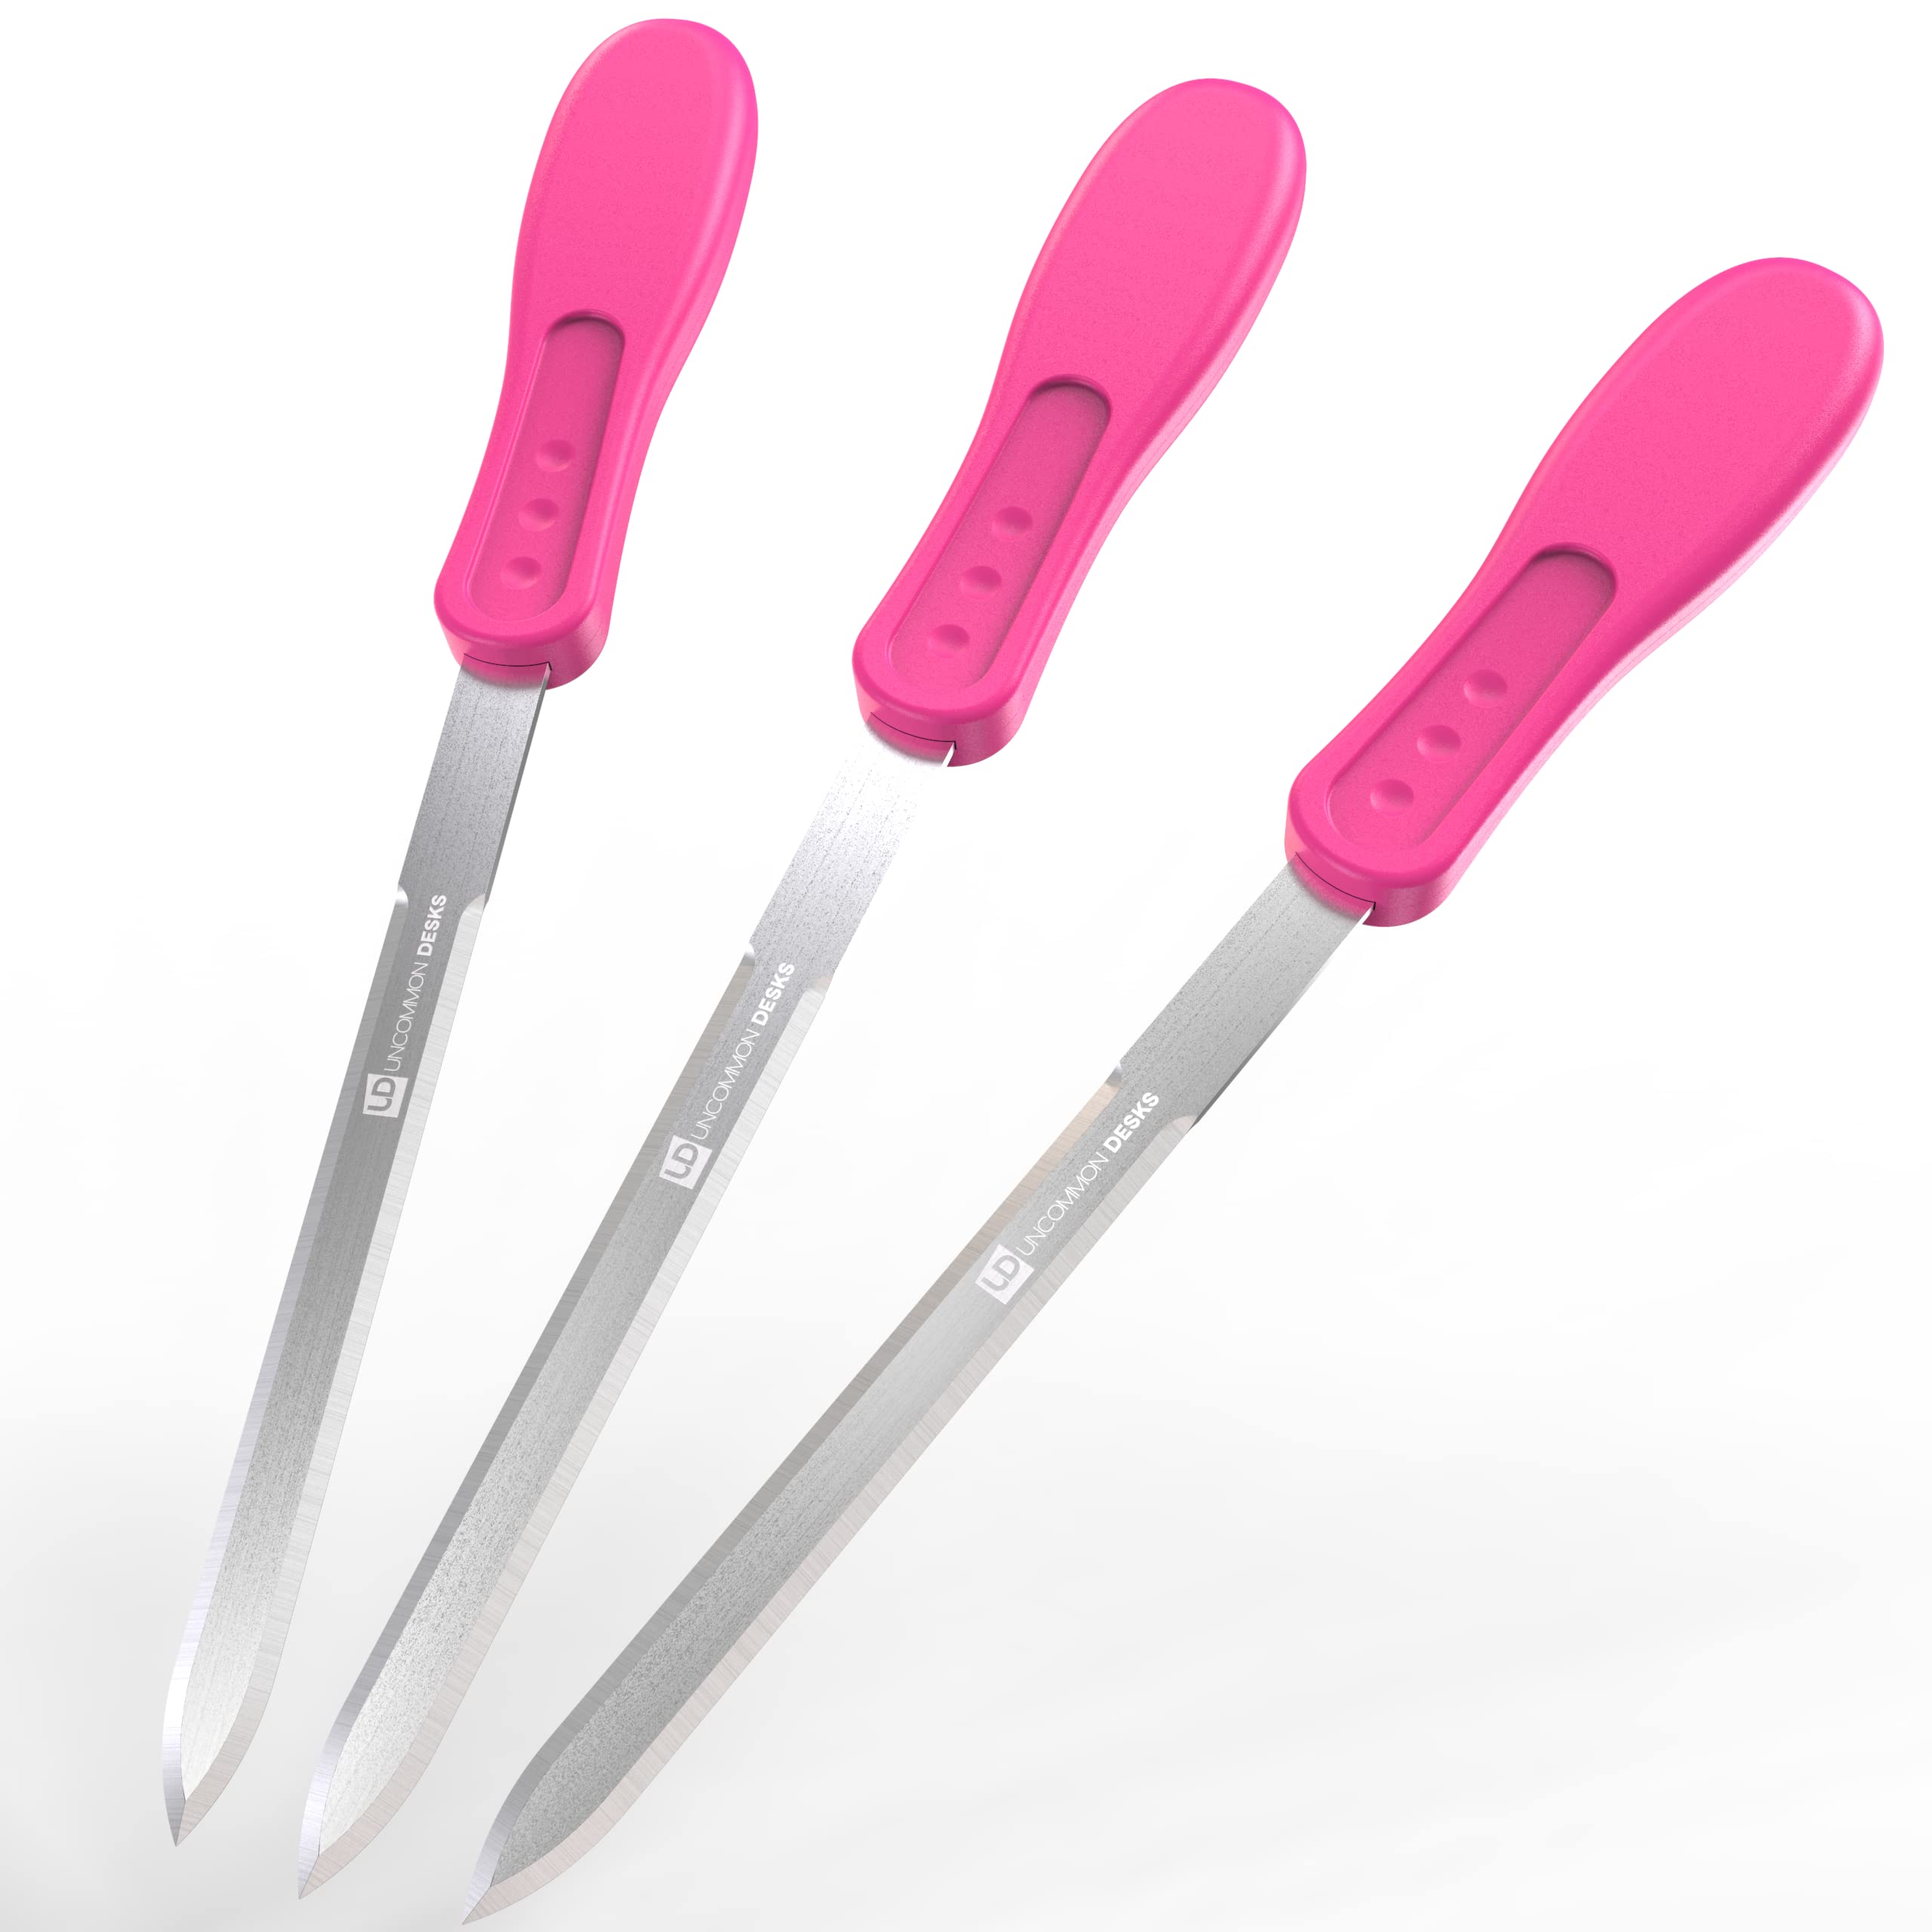 Uncommon Desks Office Letter Opener - Stainless Steel Knife-Edge Blade, Ergonomic grip Handle (Hot Pink, 3 Pieces)